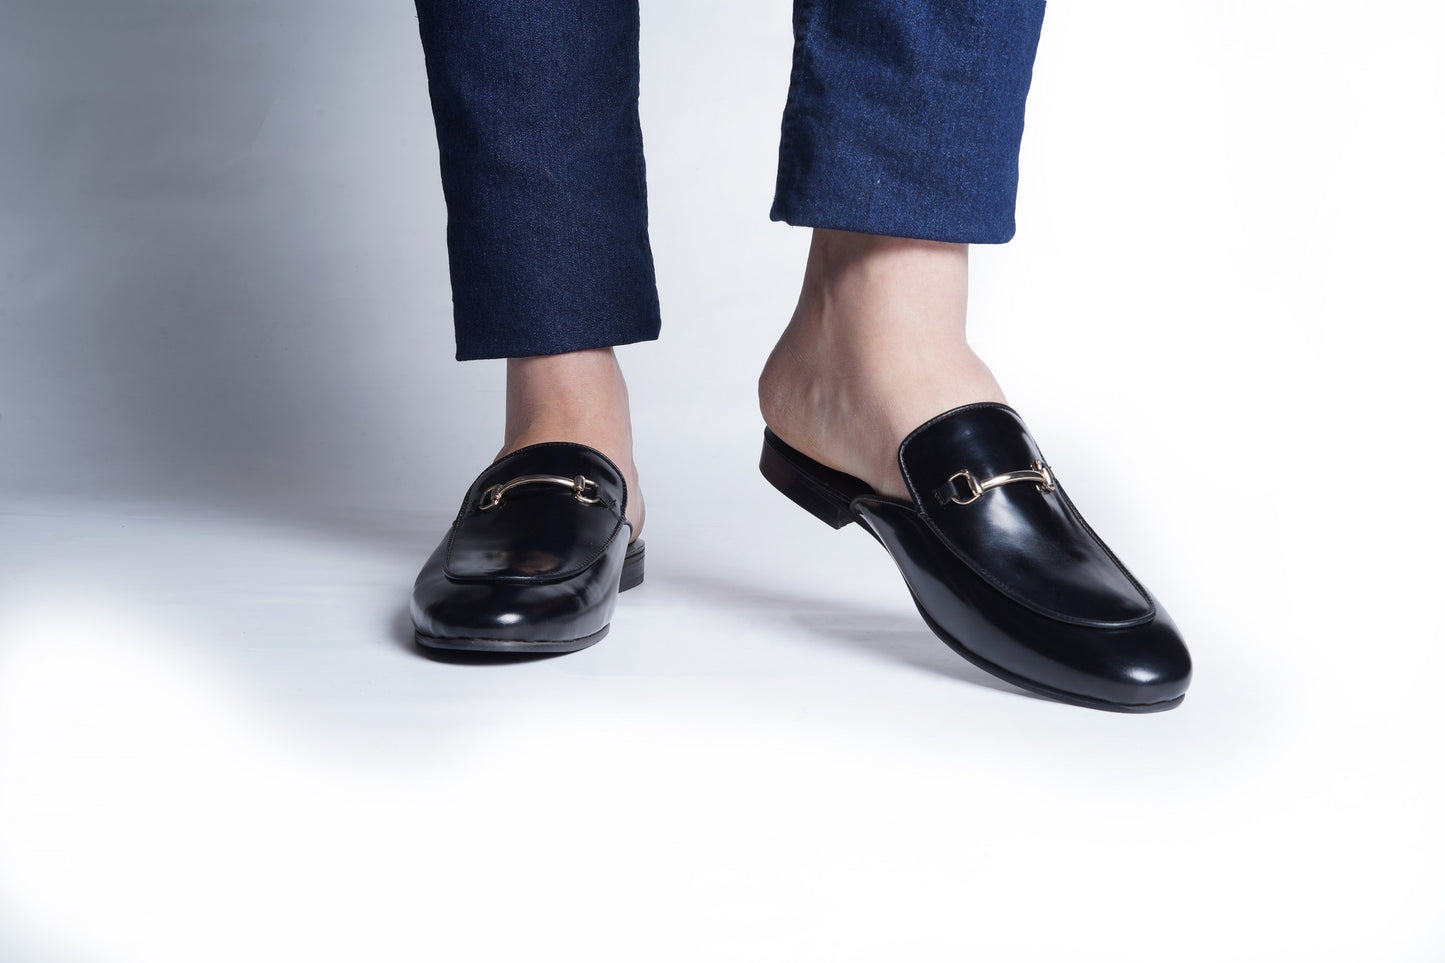 SMOOTH LEATHER MULES - BLACK